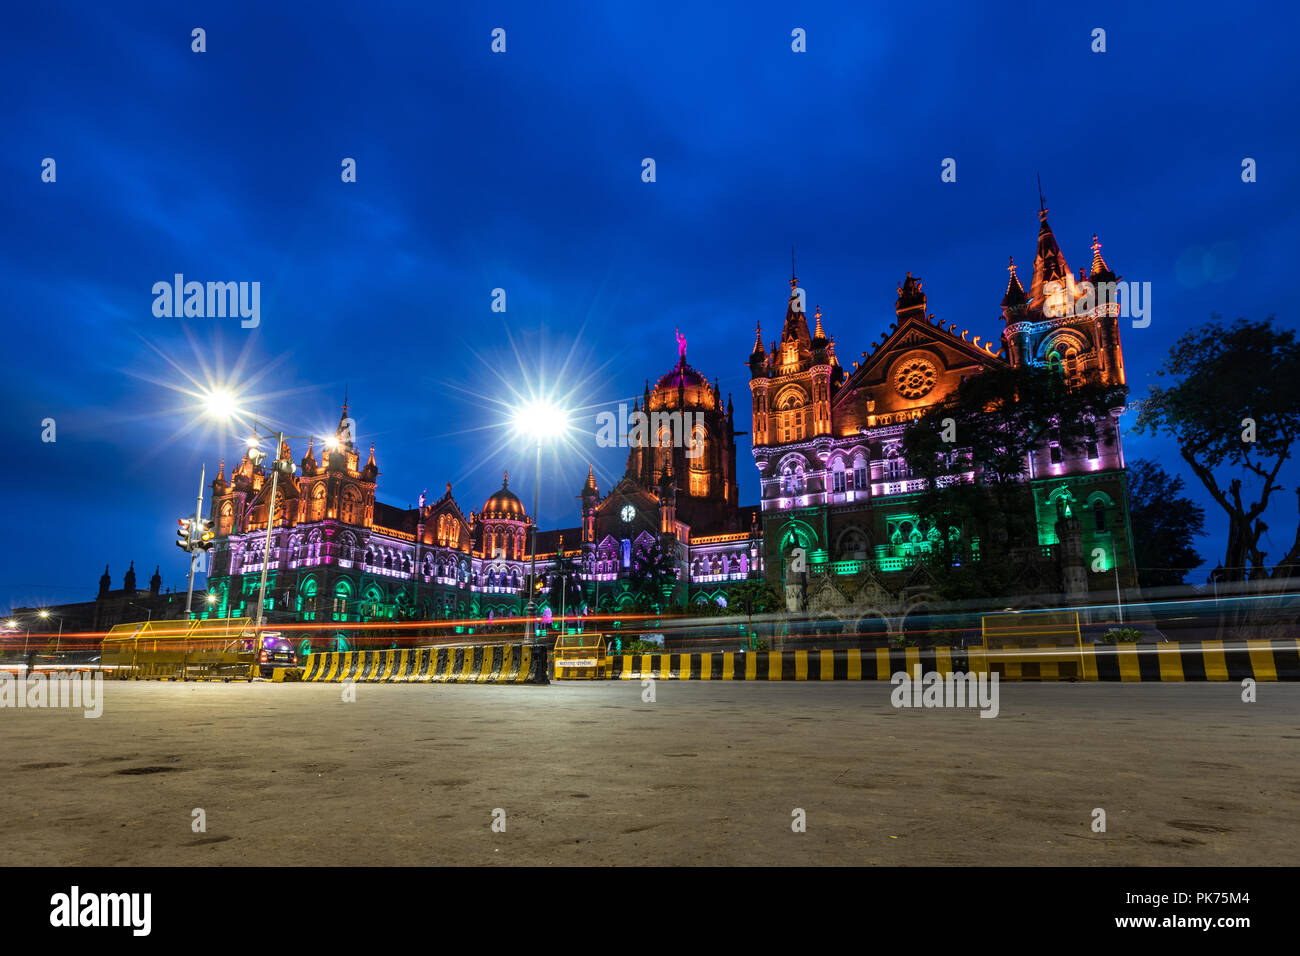 The iconic CST train station in Mumbai well lit on 15 august, the Independence day of India Stock Photo